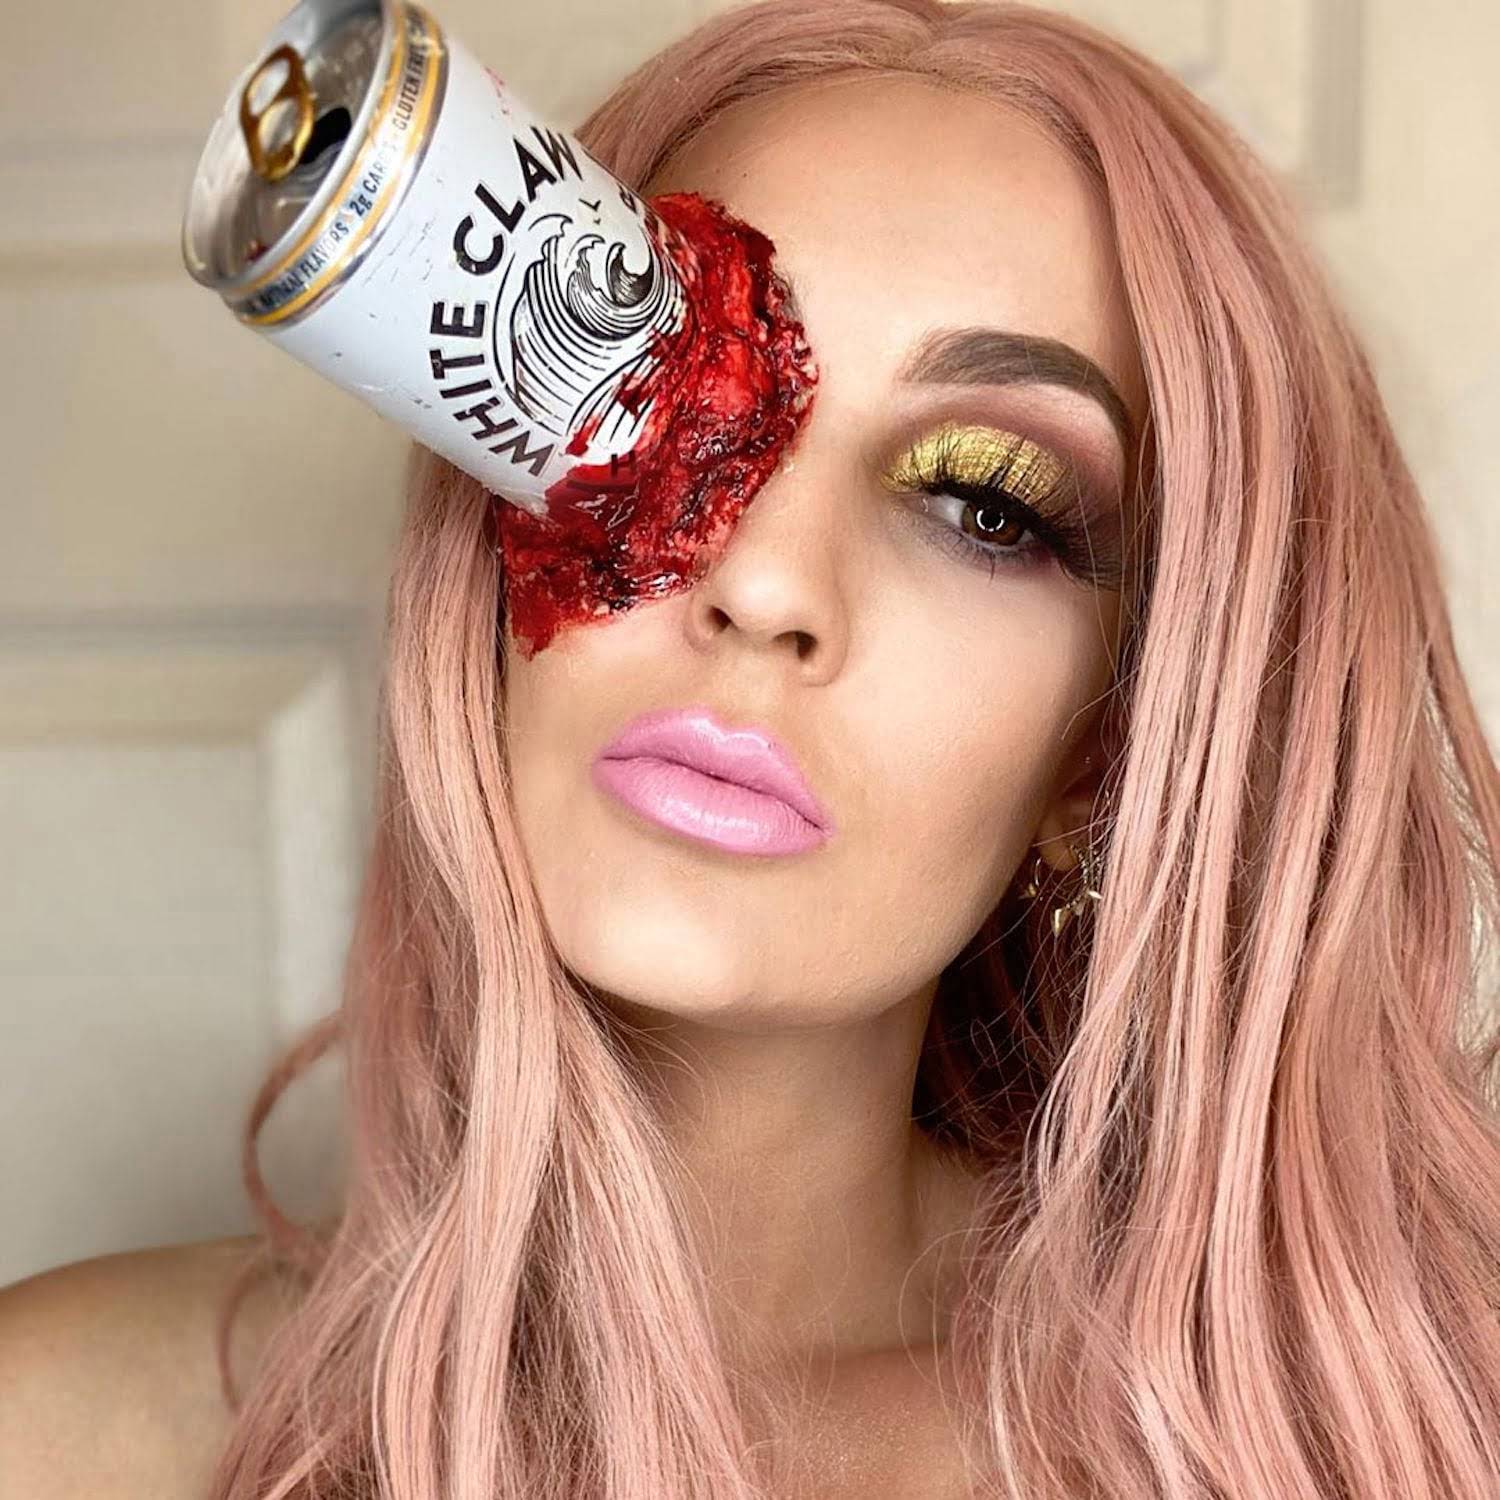 scary pictures - halloween makeup - white claw halloween makeup - Flavors 2g Cars Gluten Free A Whi Clan